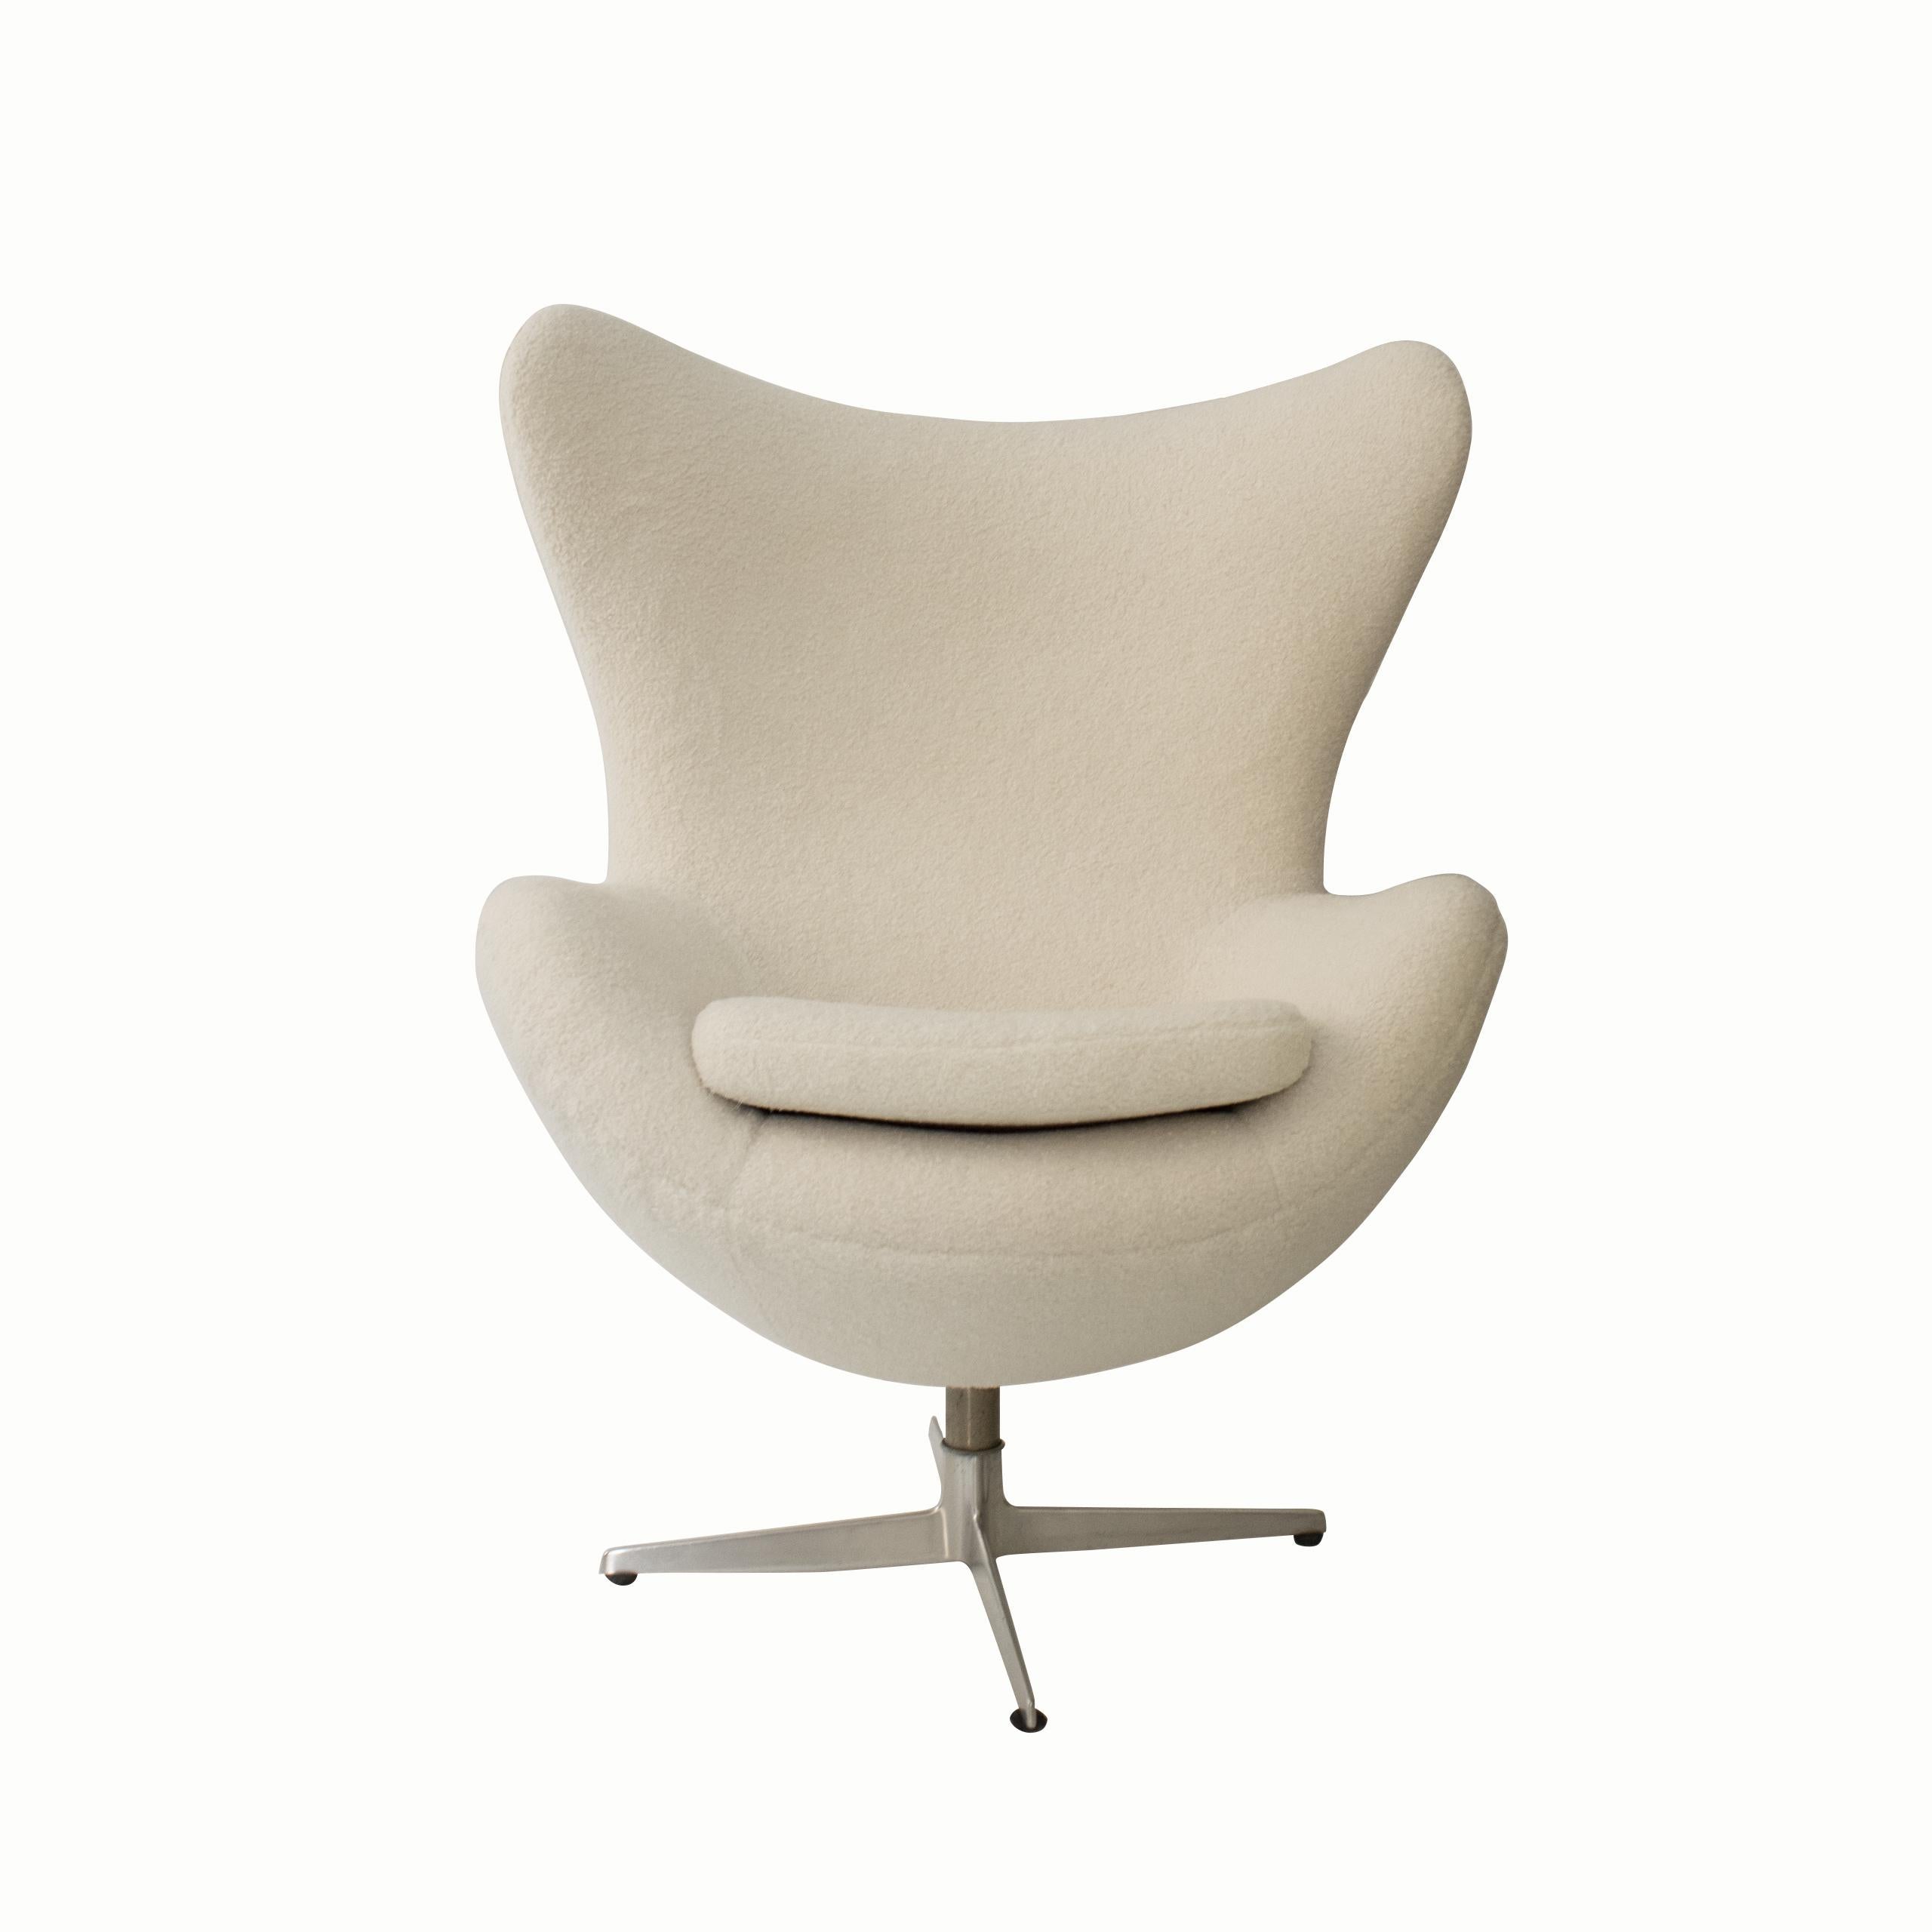 Egg Chair was designed by Arne Jacobsen in 1958 for the SAS Hotel in Denmark. and is made with a birch plywood frame covered with foam and fabric padding, a technique pioneered by Jacobsen. This item has been reupholstered in beige buclé.